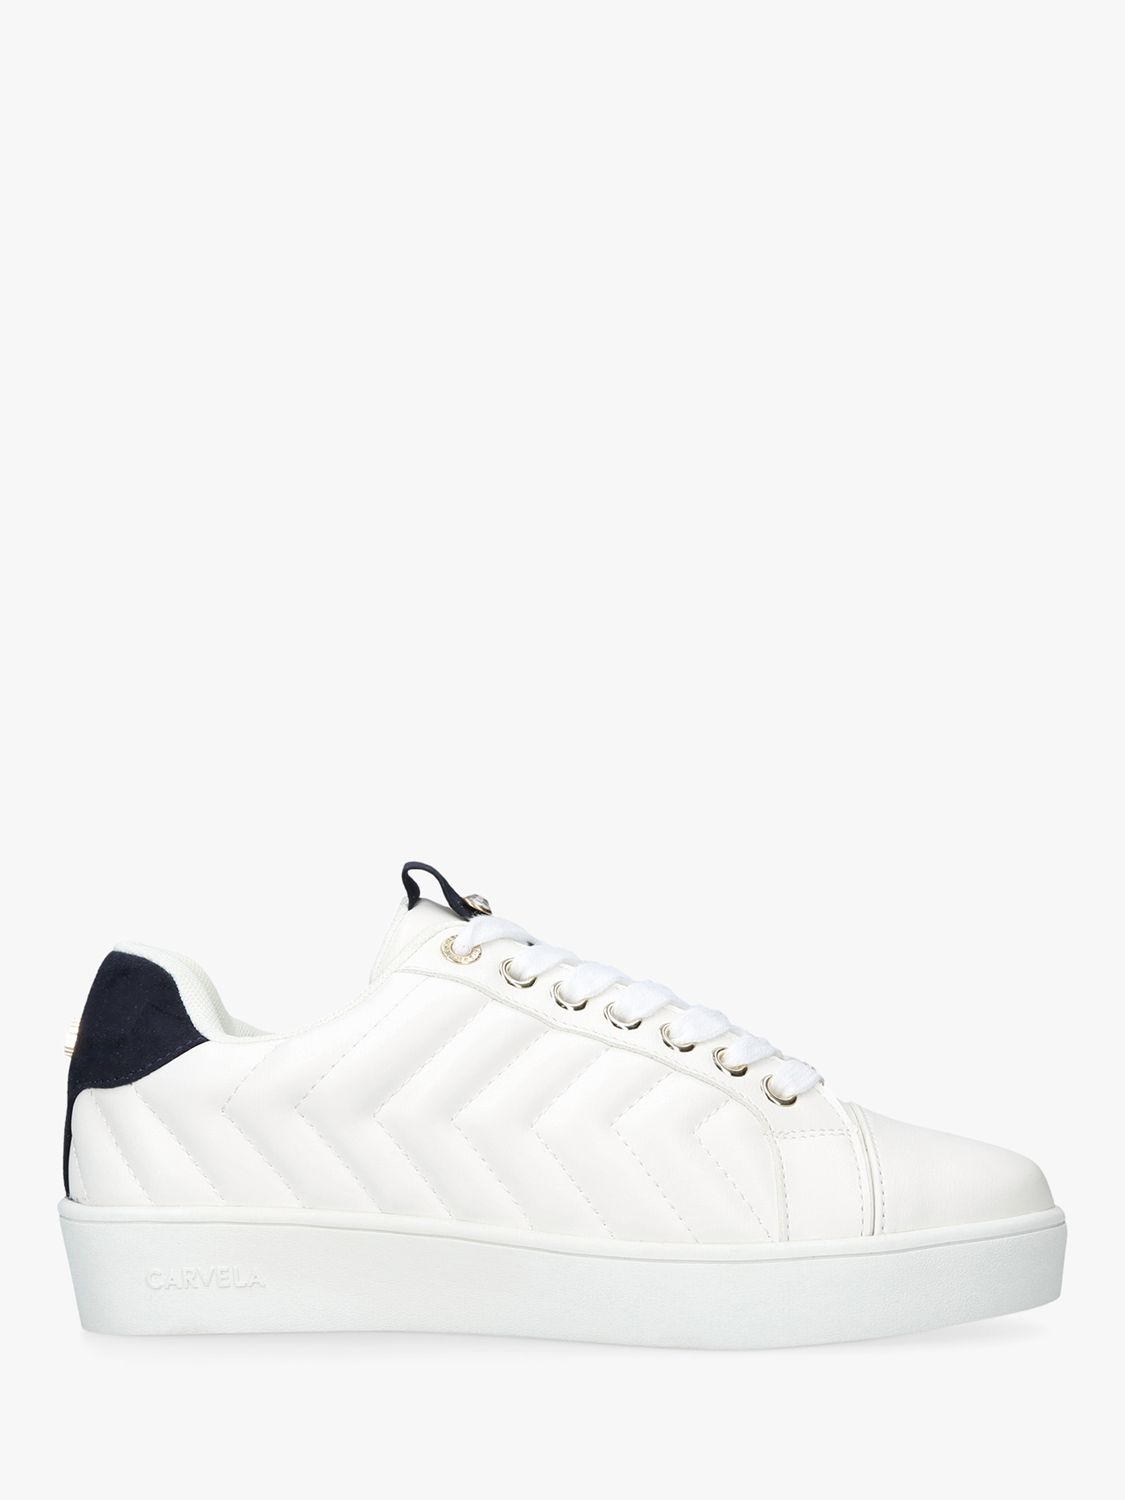 Carvela Joyful Quilted Trainers, White at John Lewis & Partners